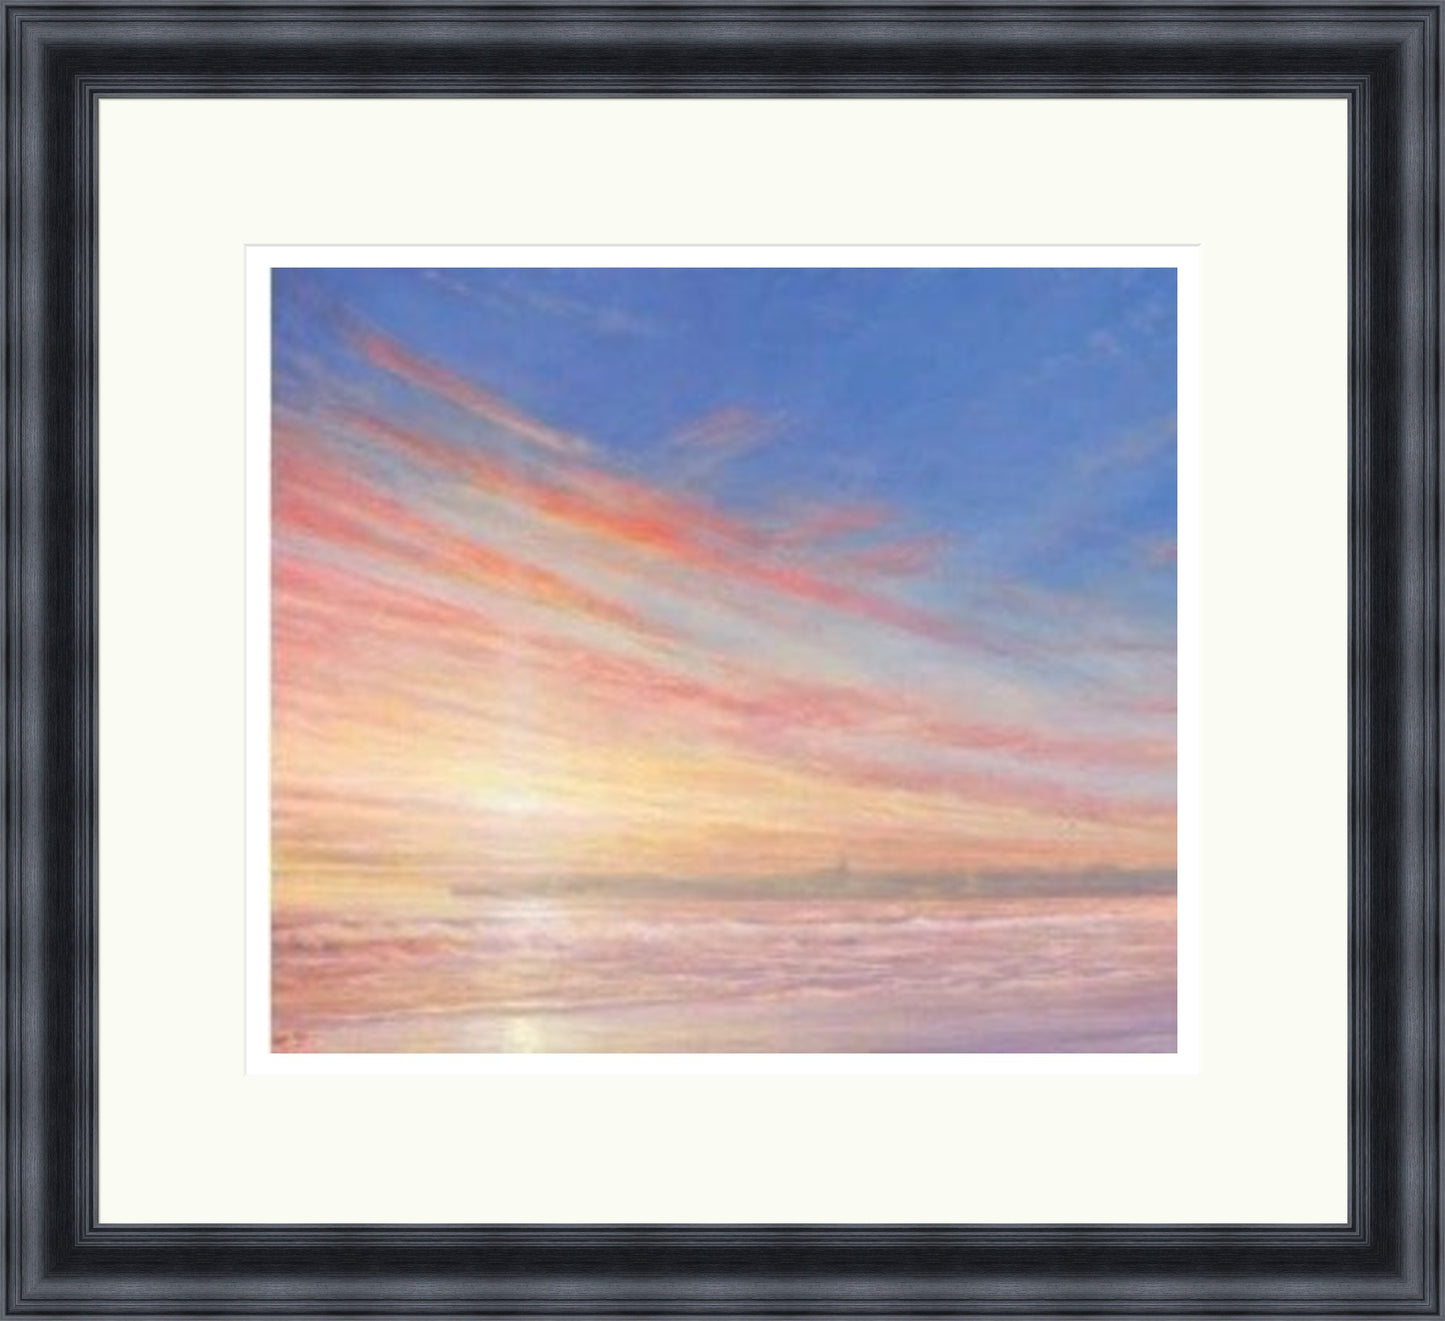 Sunrise at St Andrews (Limited Edition) by Derek Hare